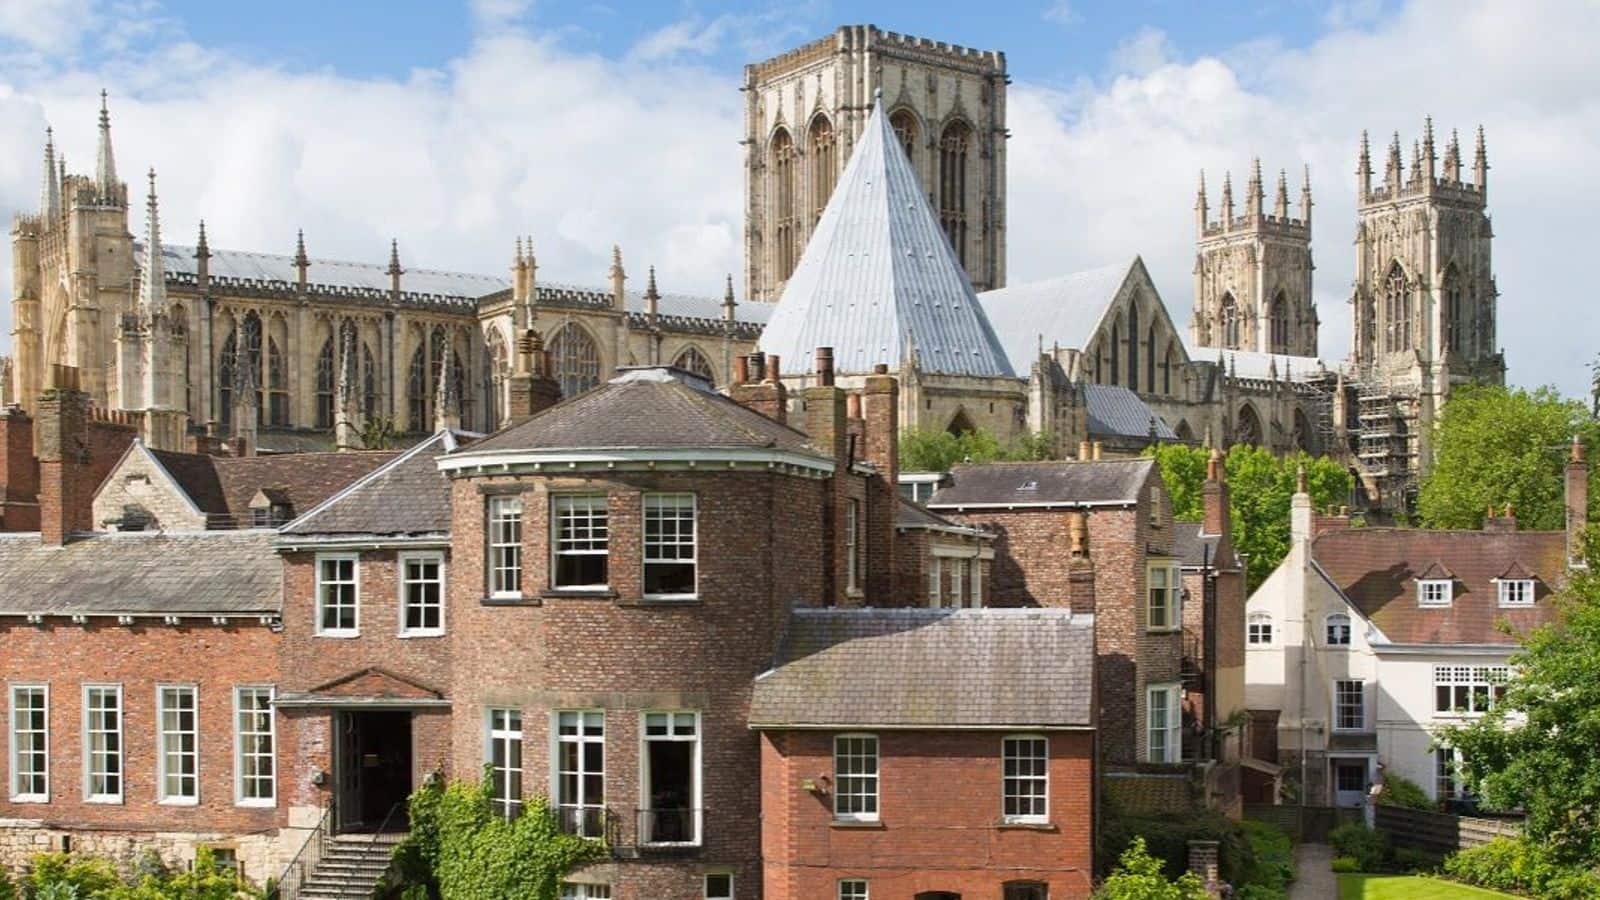 Step back in time as you explore Victorian-era York, England